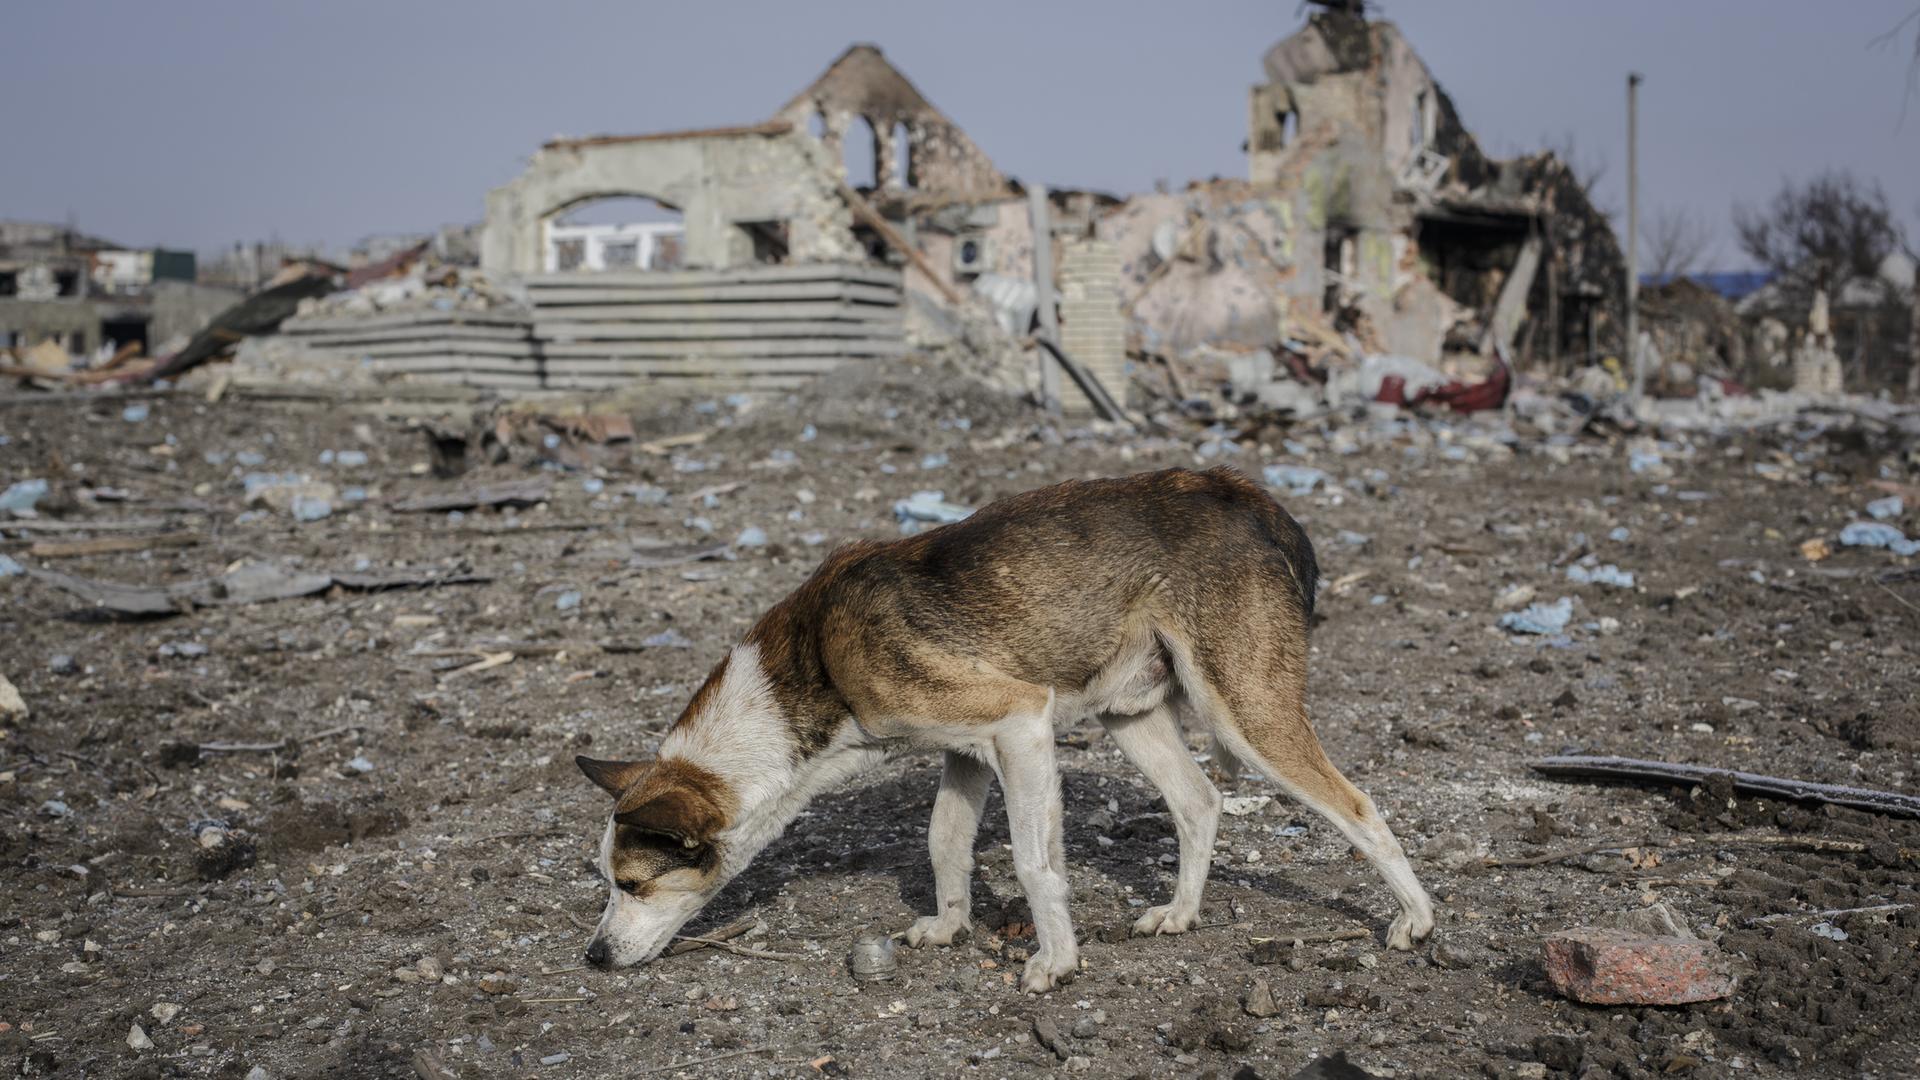 BAKHMUT, UKRAINE - FEBRUARY 24 A dog searchs for food amid rubble as Russia-Ukraine war continues in Bakhmut, Ukraine on February 24, 2023. Marek M. Berezowski / Anadolu Agency